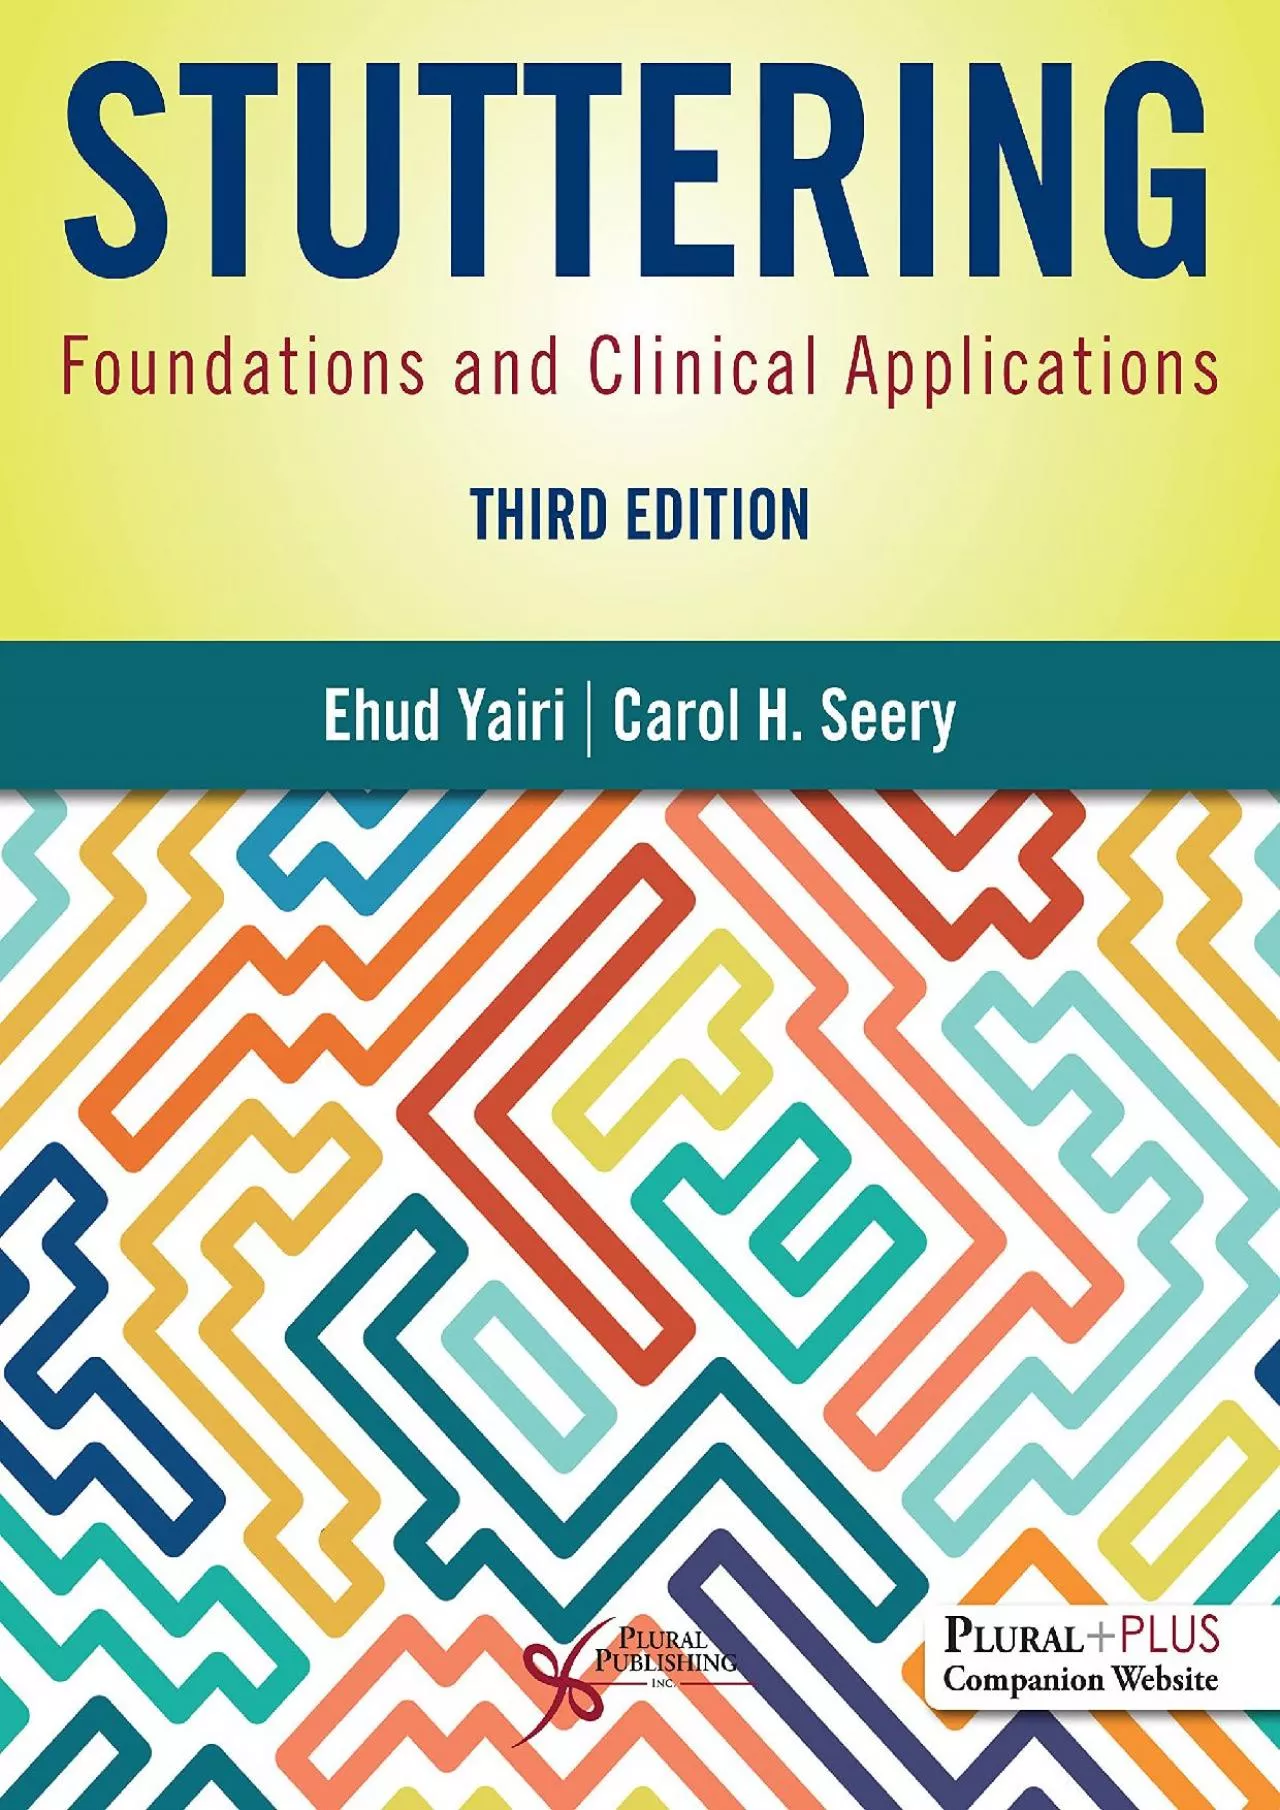 (EBOOK)-Stuttering: Foundations and Clinical Applications, Third Edition